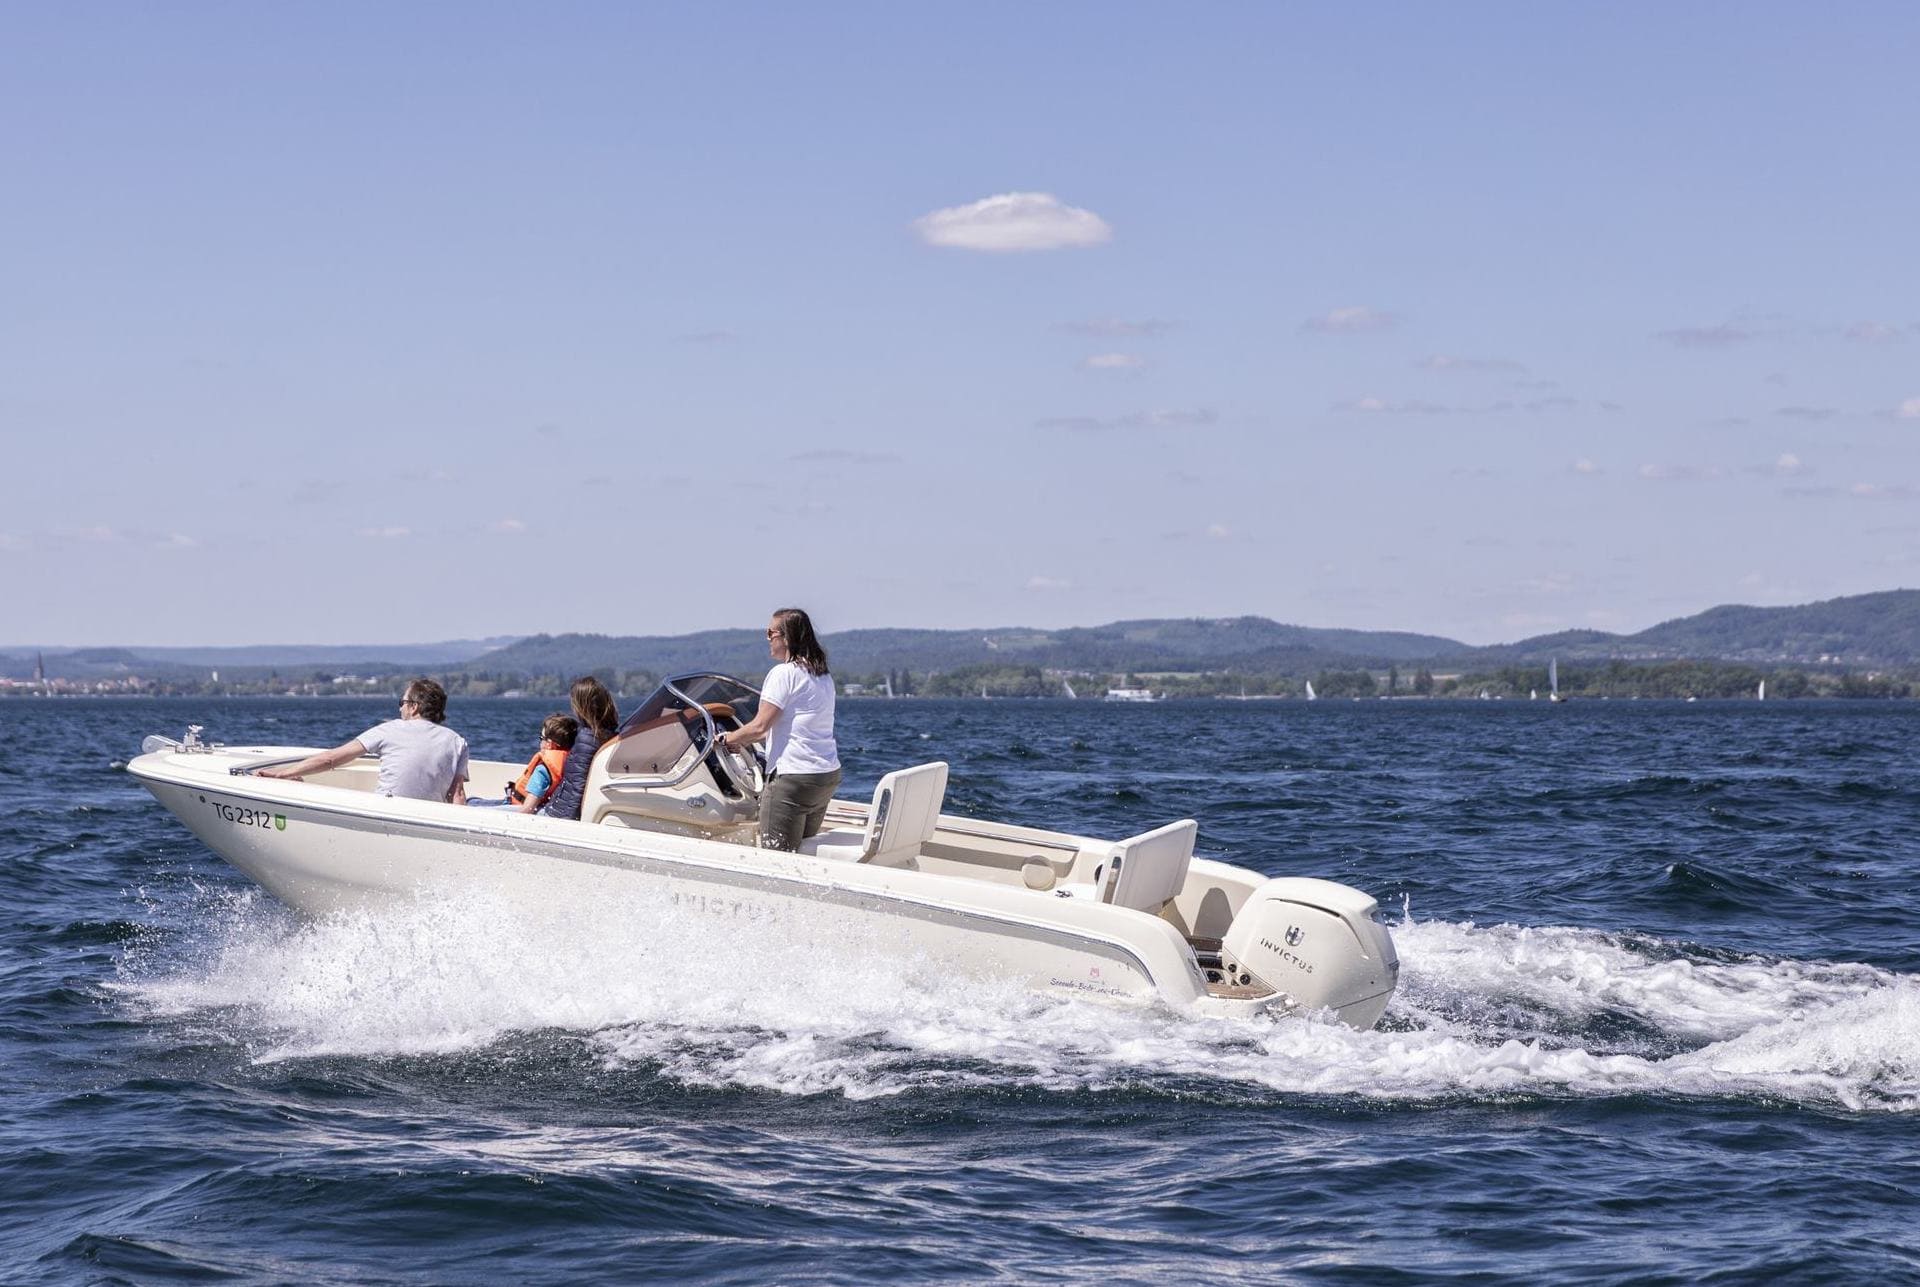 Yachtcharter Bodensee Seeeule Bodensee Charter Invictus FX 200_29